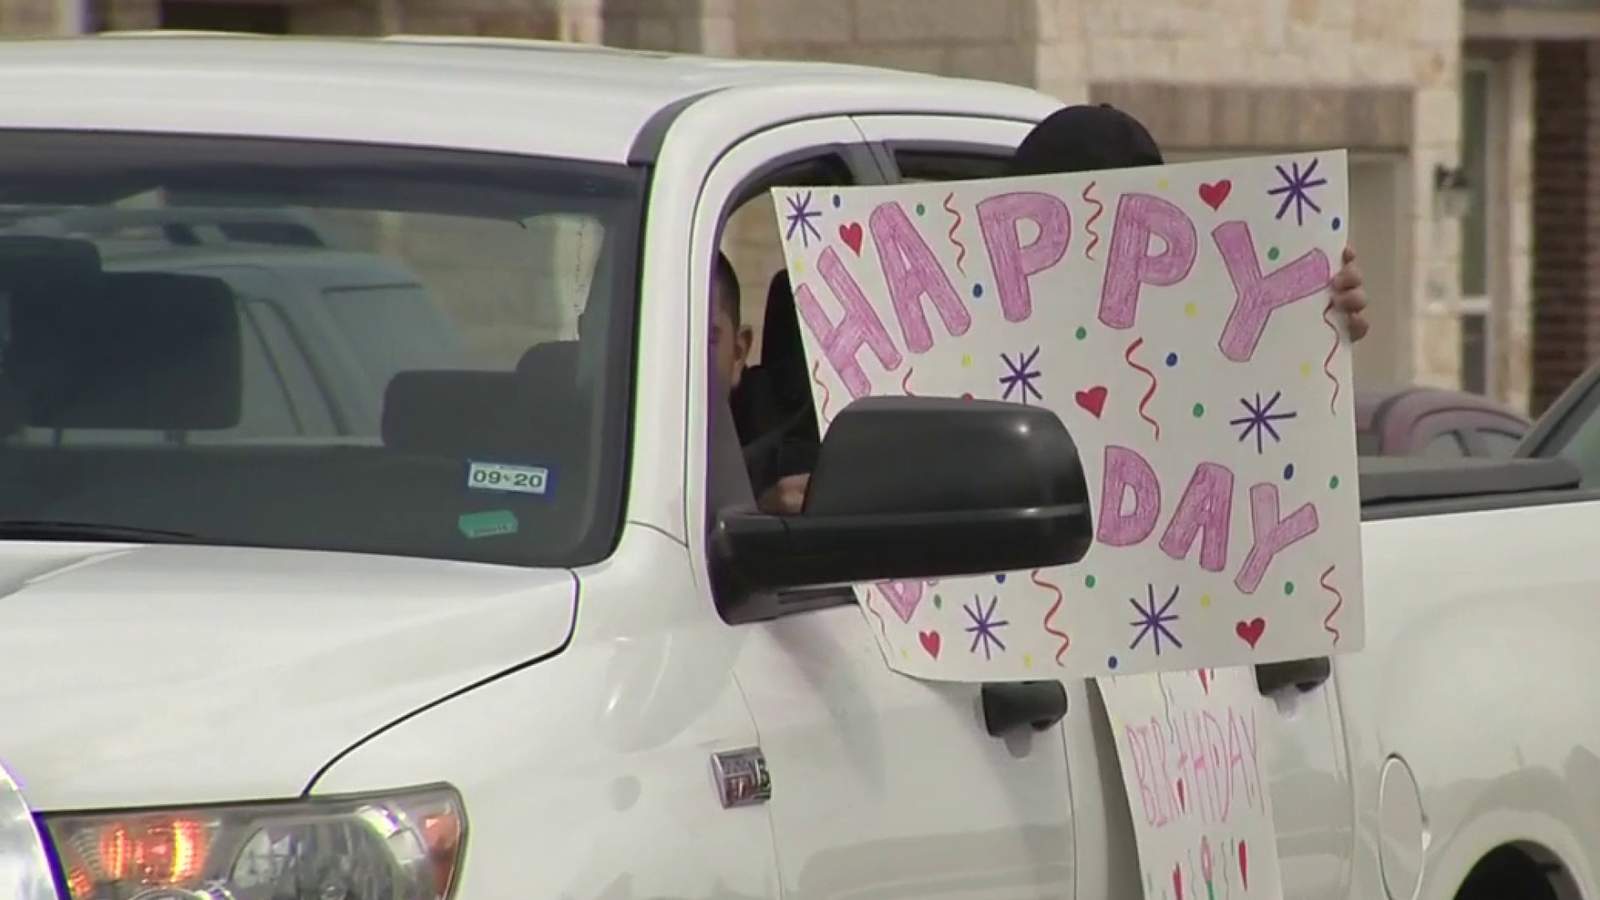 Mom surprises daughter on 10th birthday with street parade